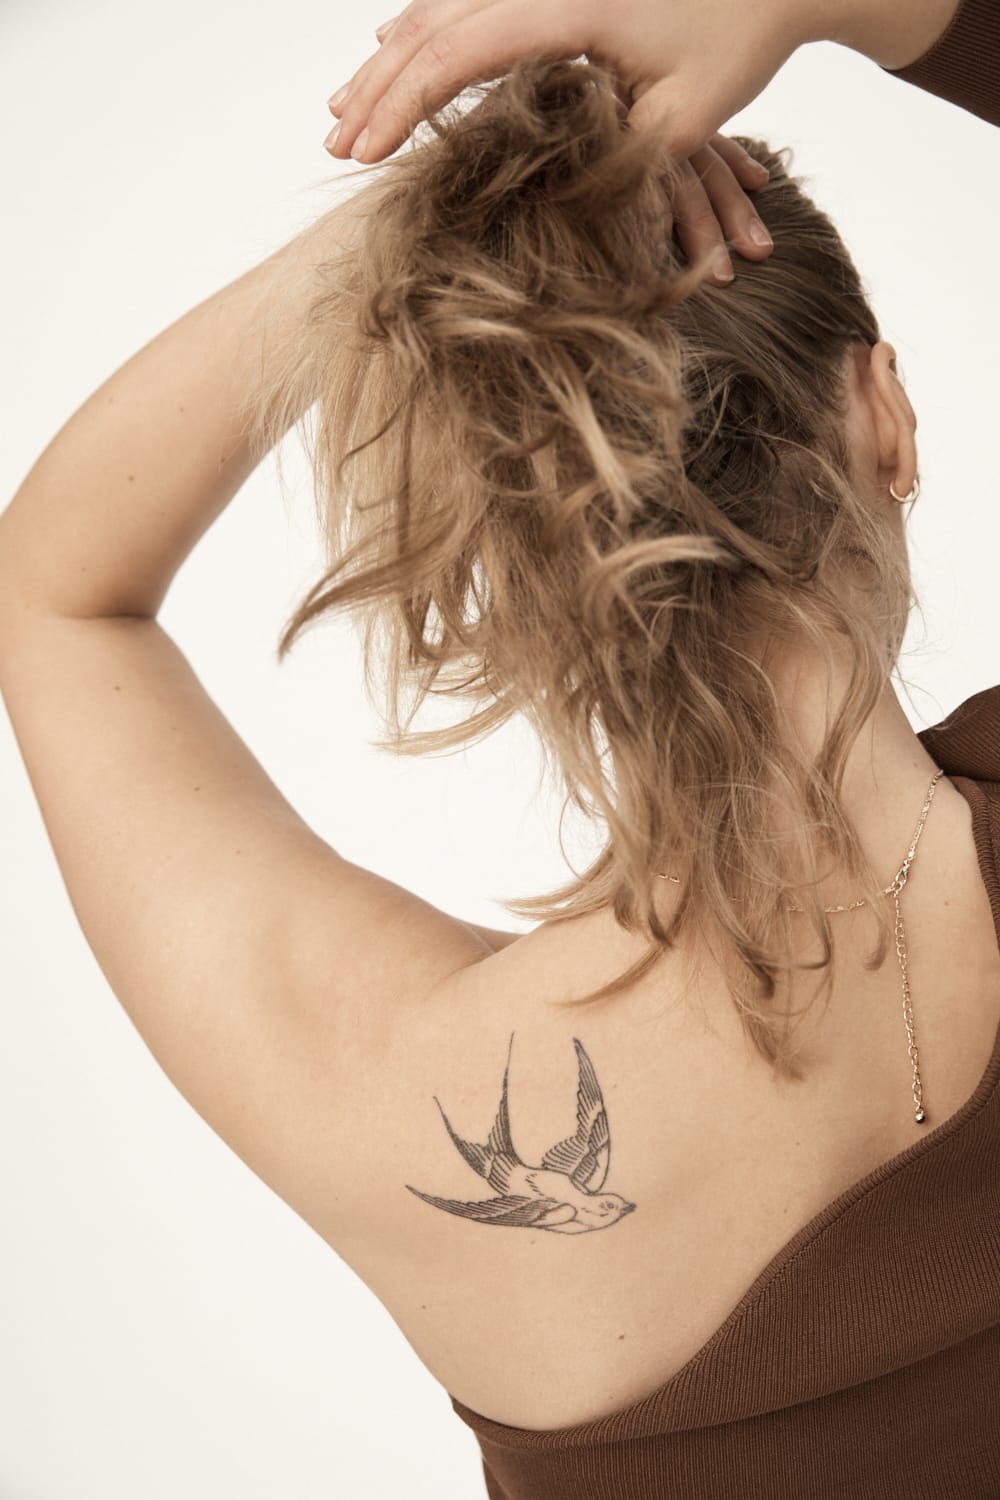 This Is How Ephemeral Semi-Permanent Tattoos Work | Darcy